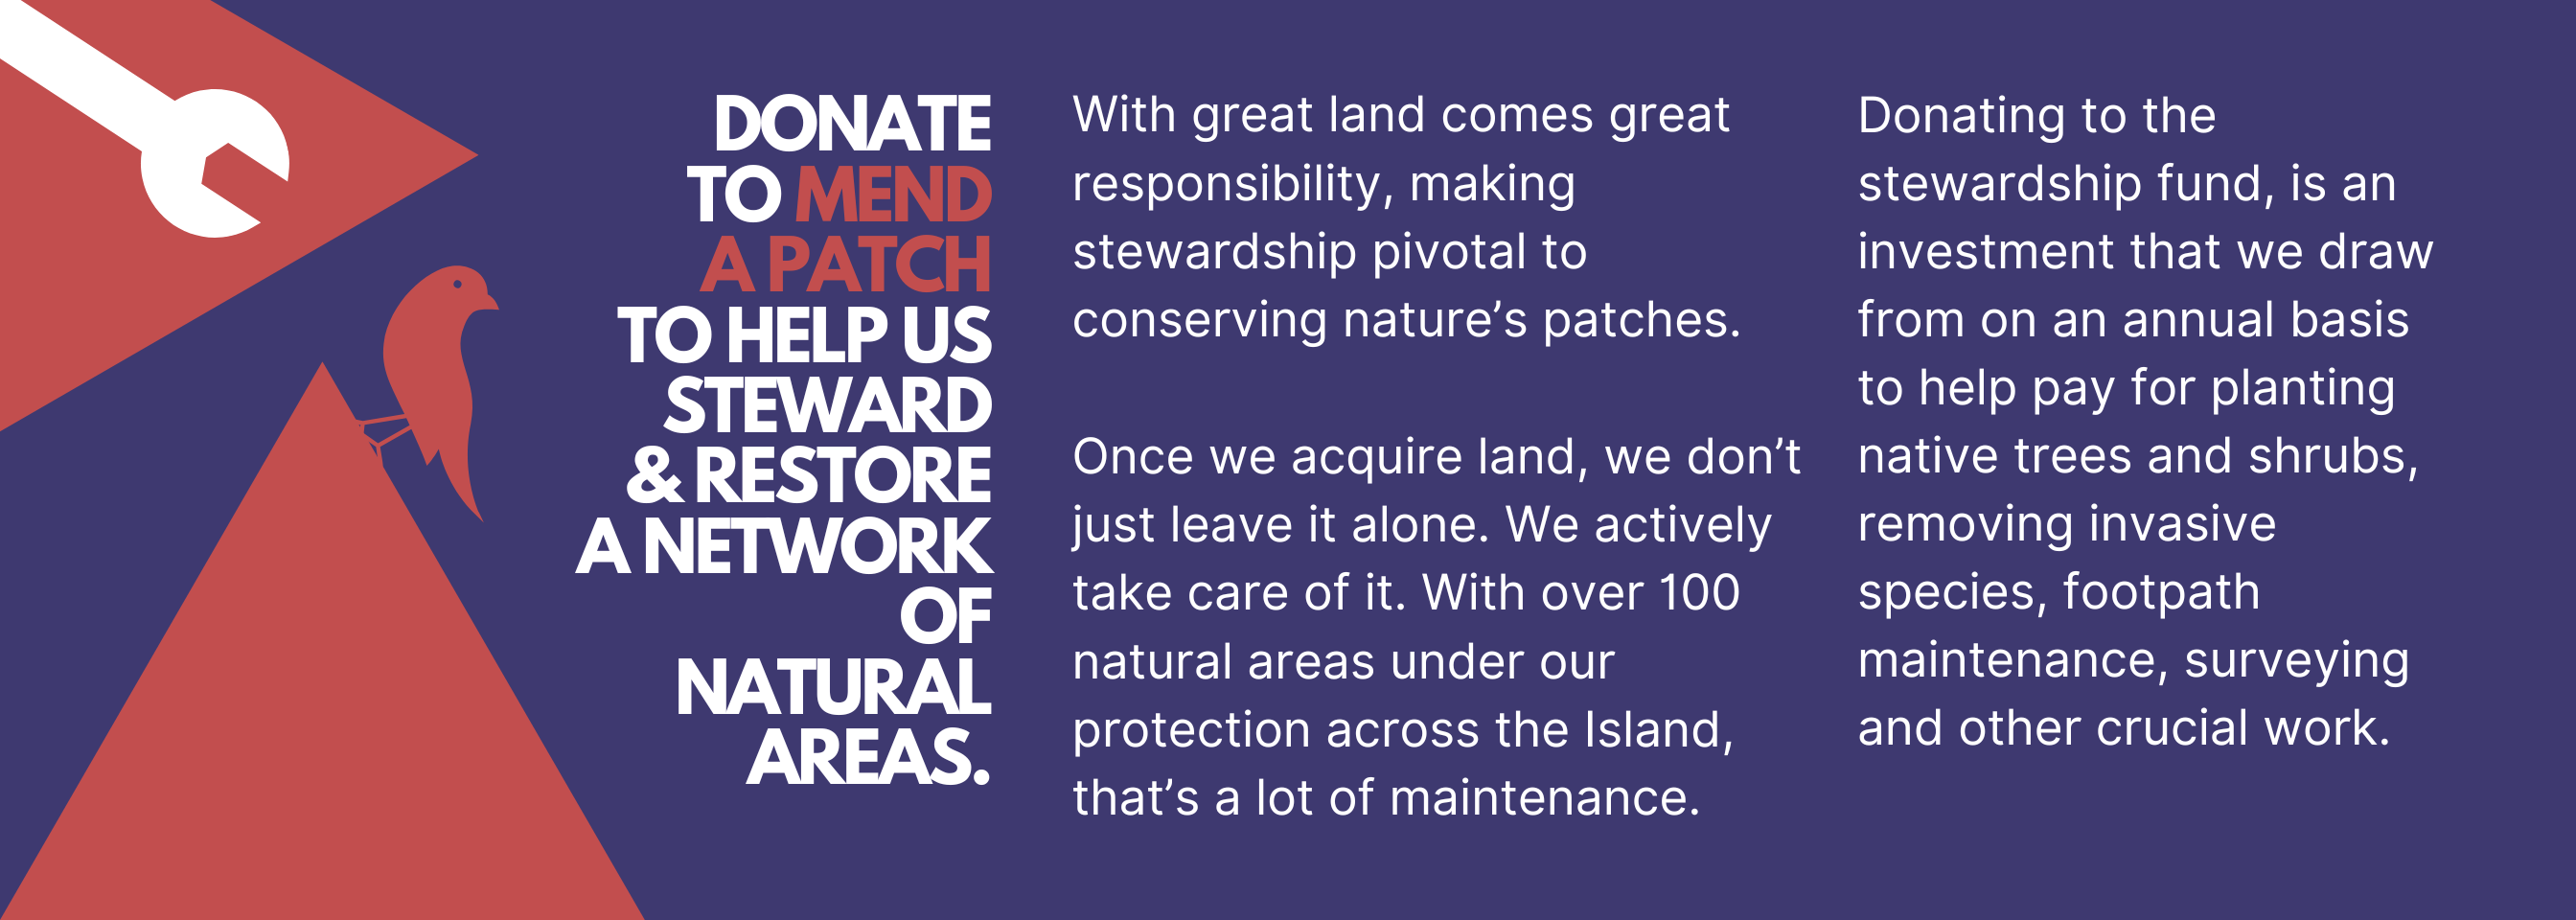 Donating to the stewardship funds ensures we can protect natural areas in perpetuity